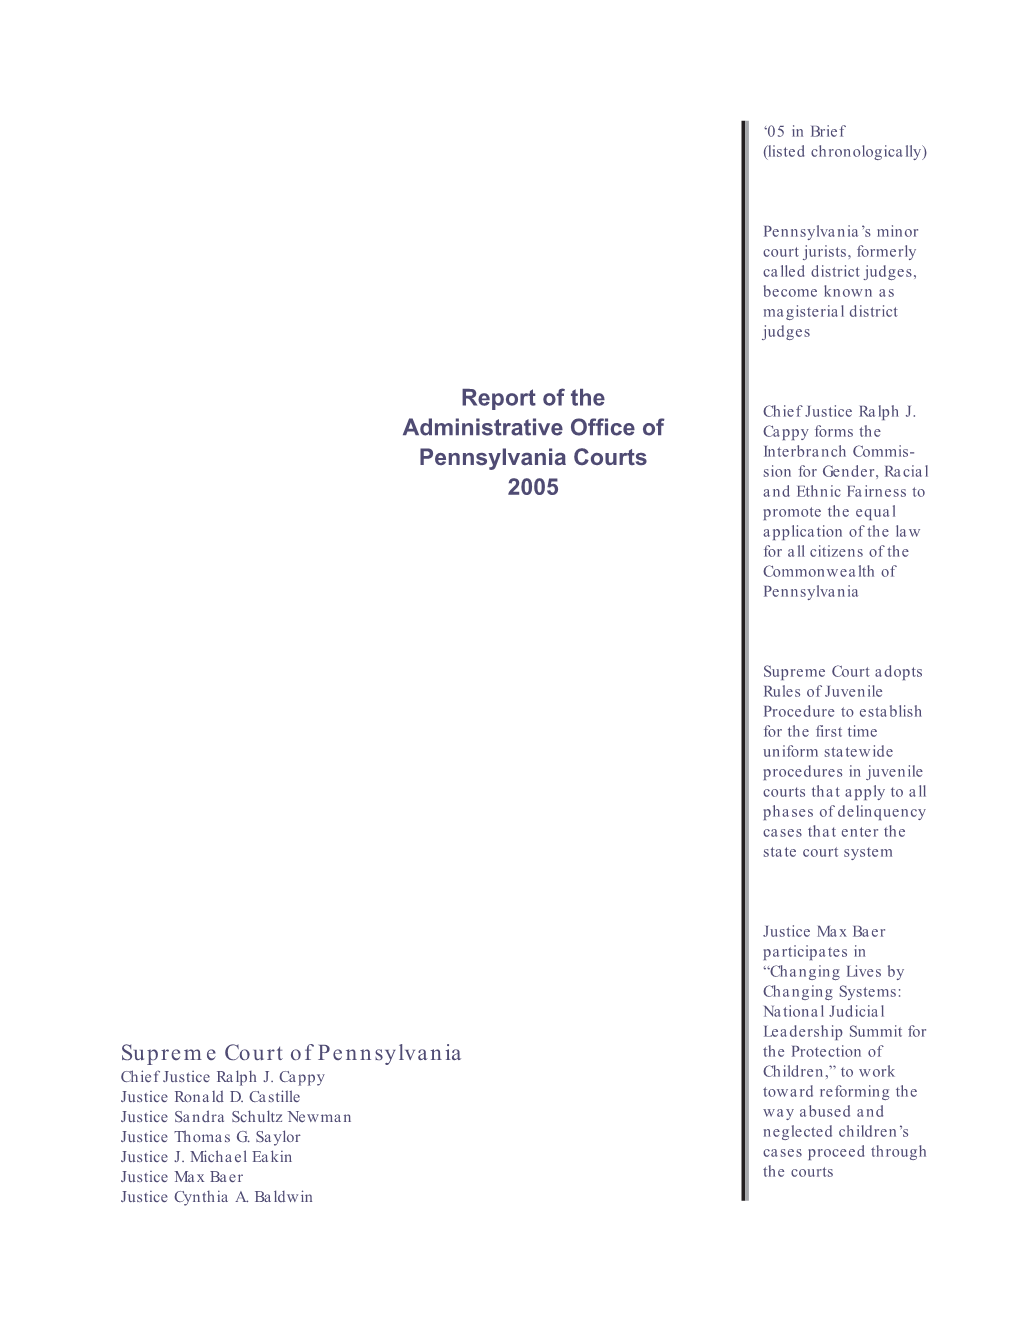 Report of the Administrative Office of Pennsylvania Courts 2005